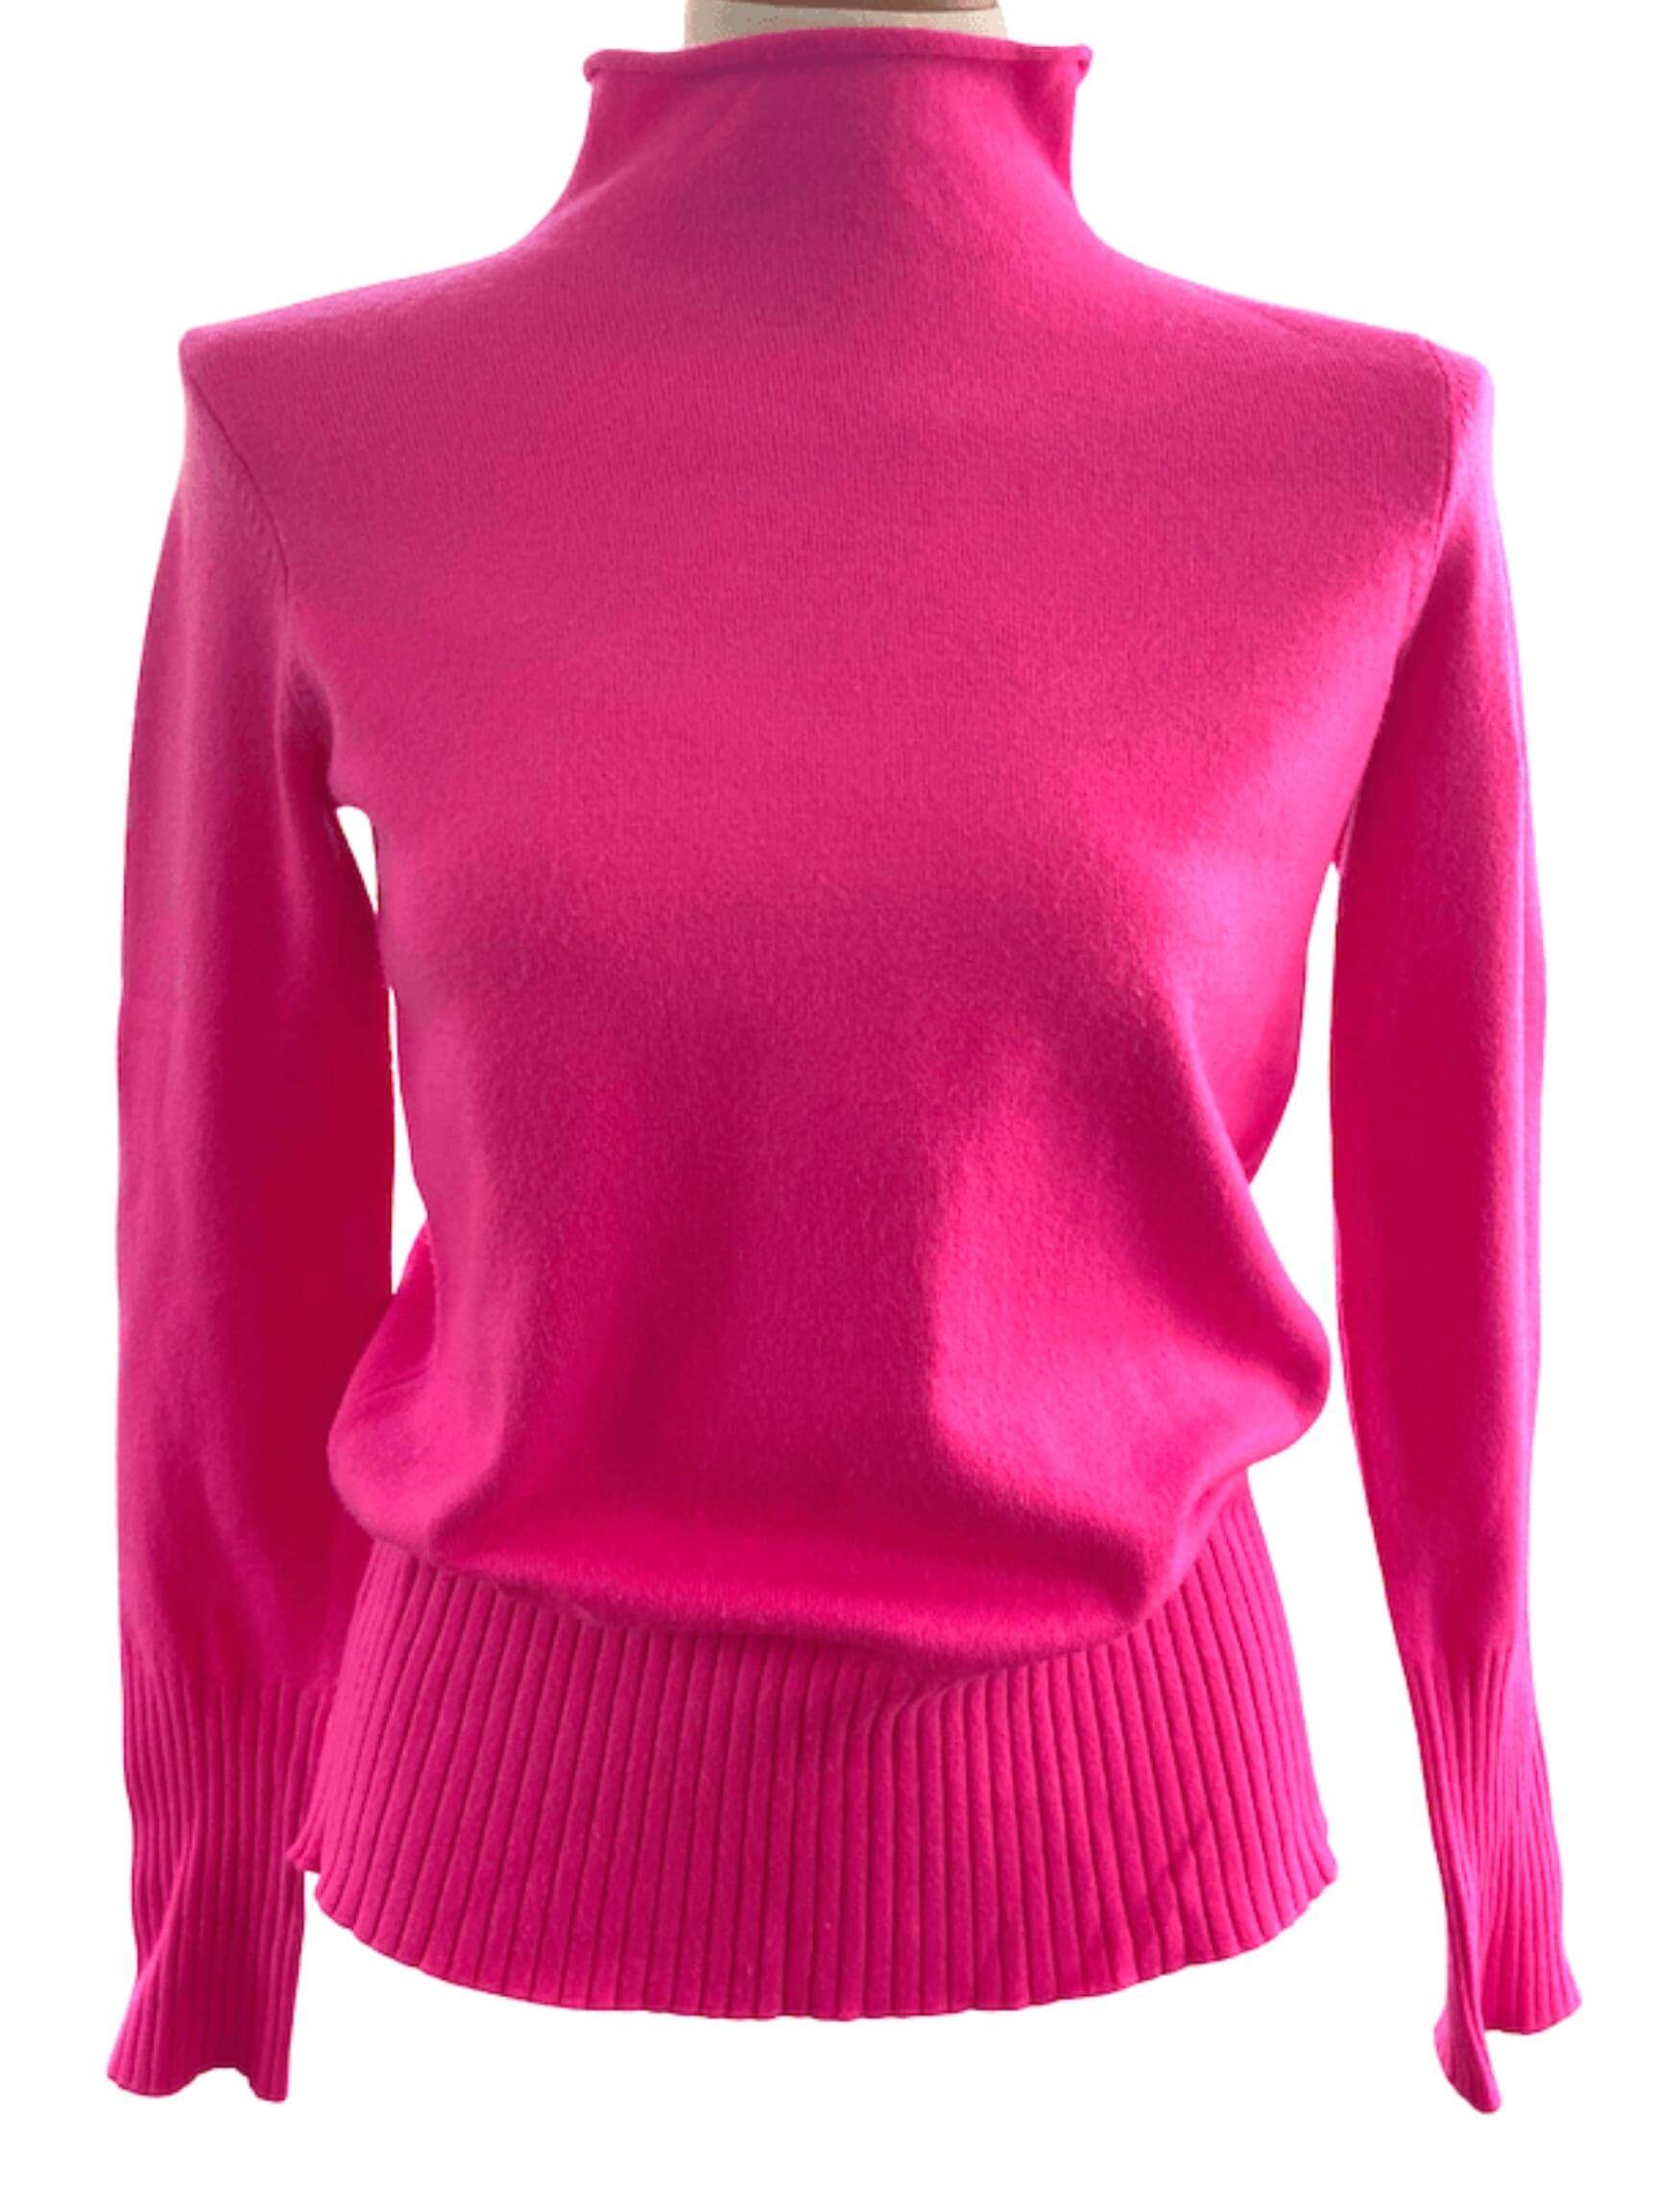 Bright Spring FRENCH CONNECTION hot pink mock turtleneck sweater